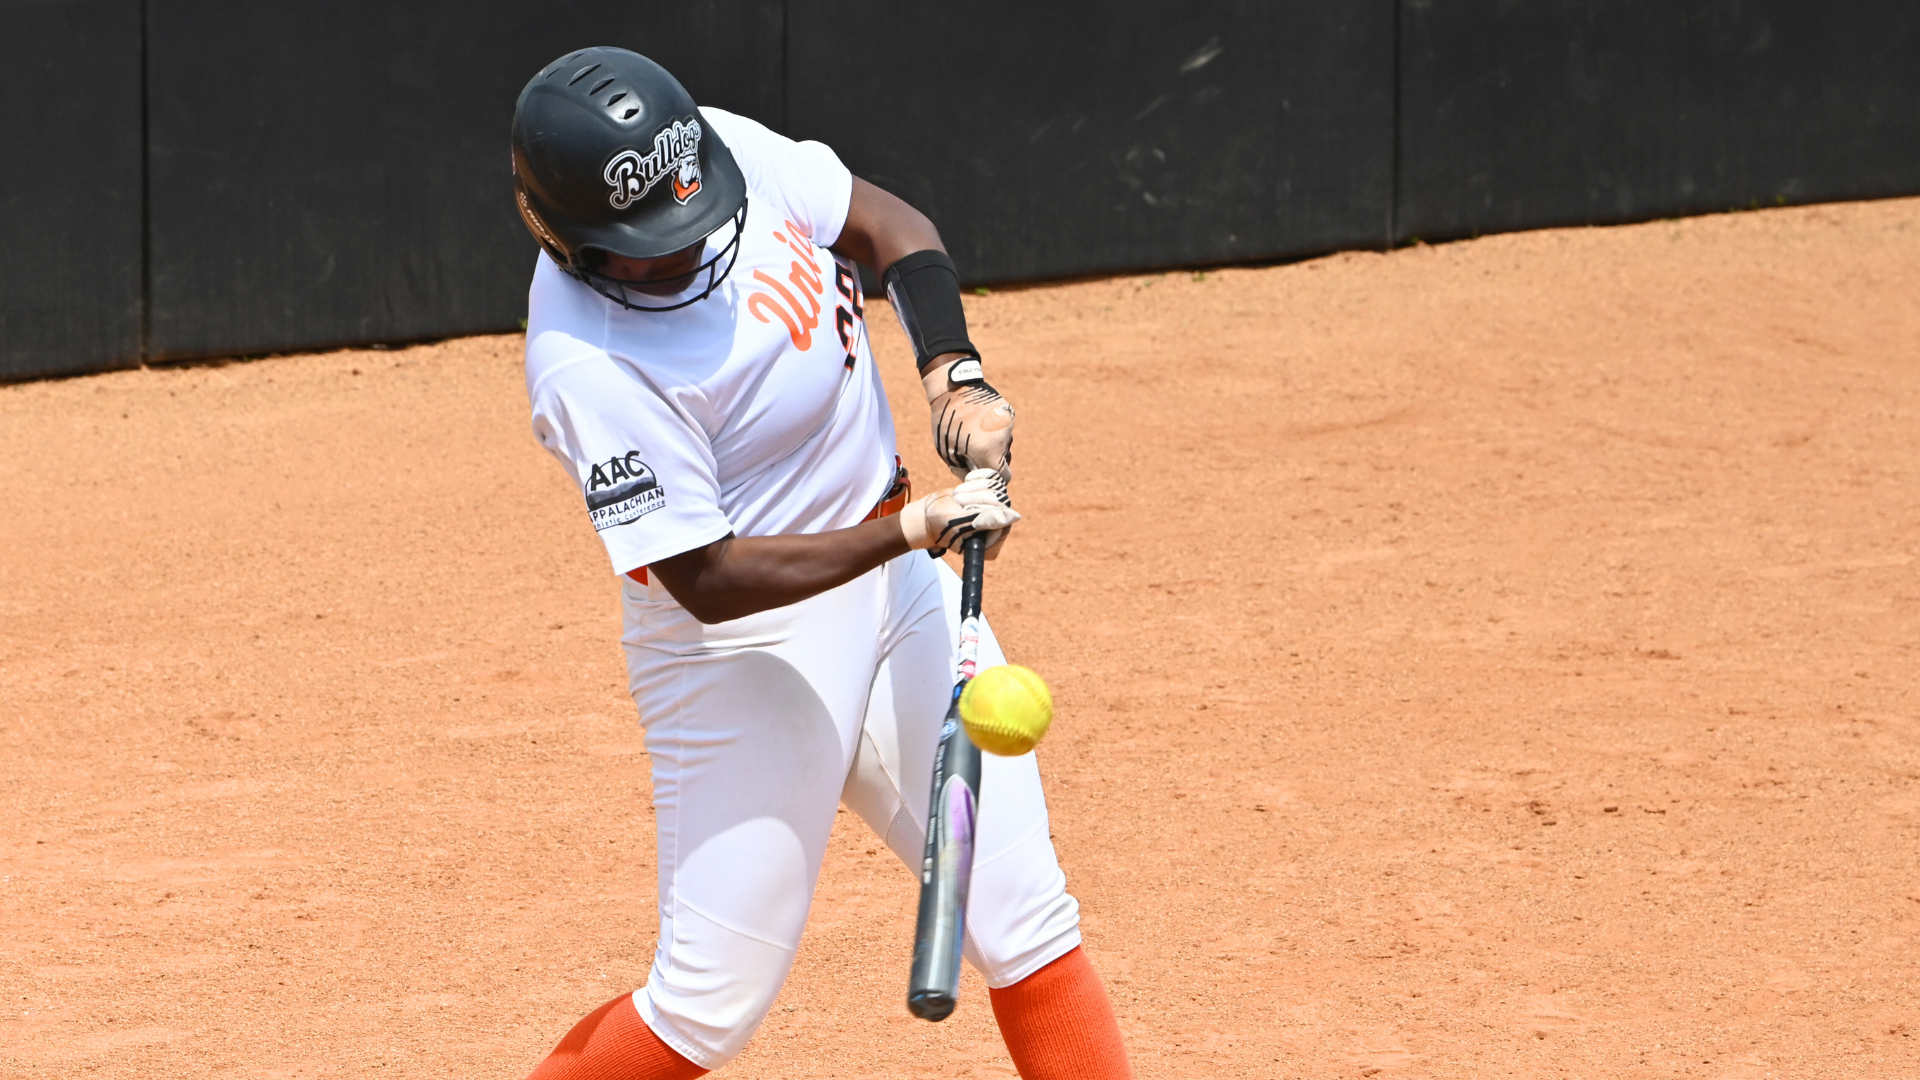 The Bulldogs fall in doubleheader against No. 22 Reinhardt